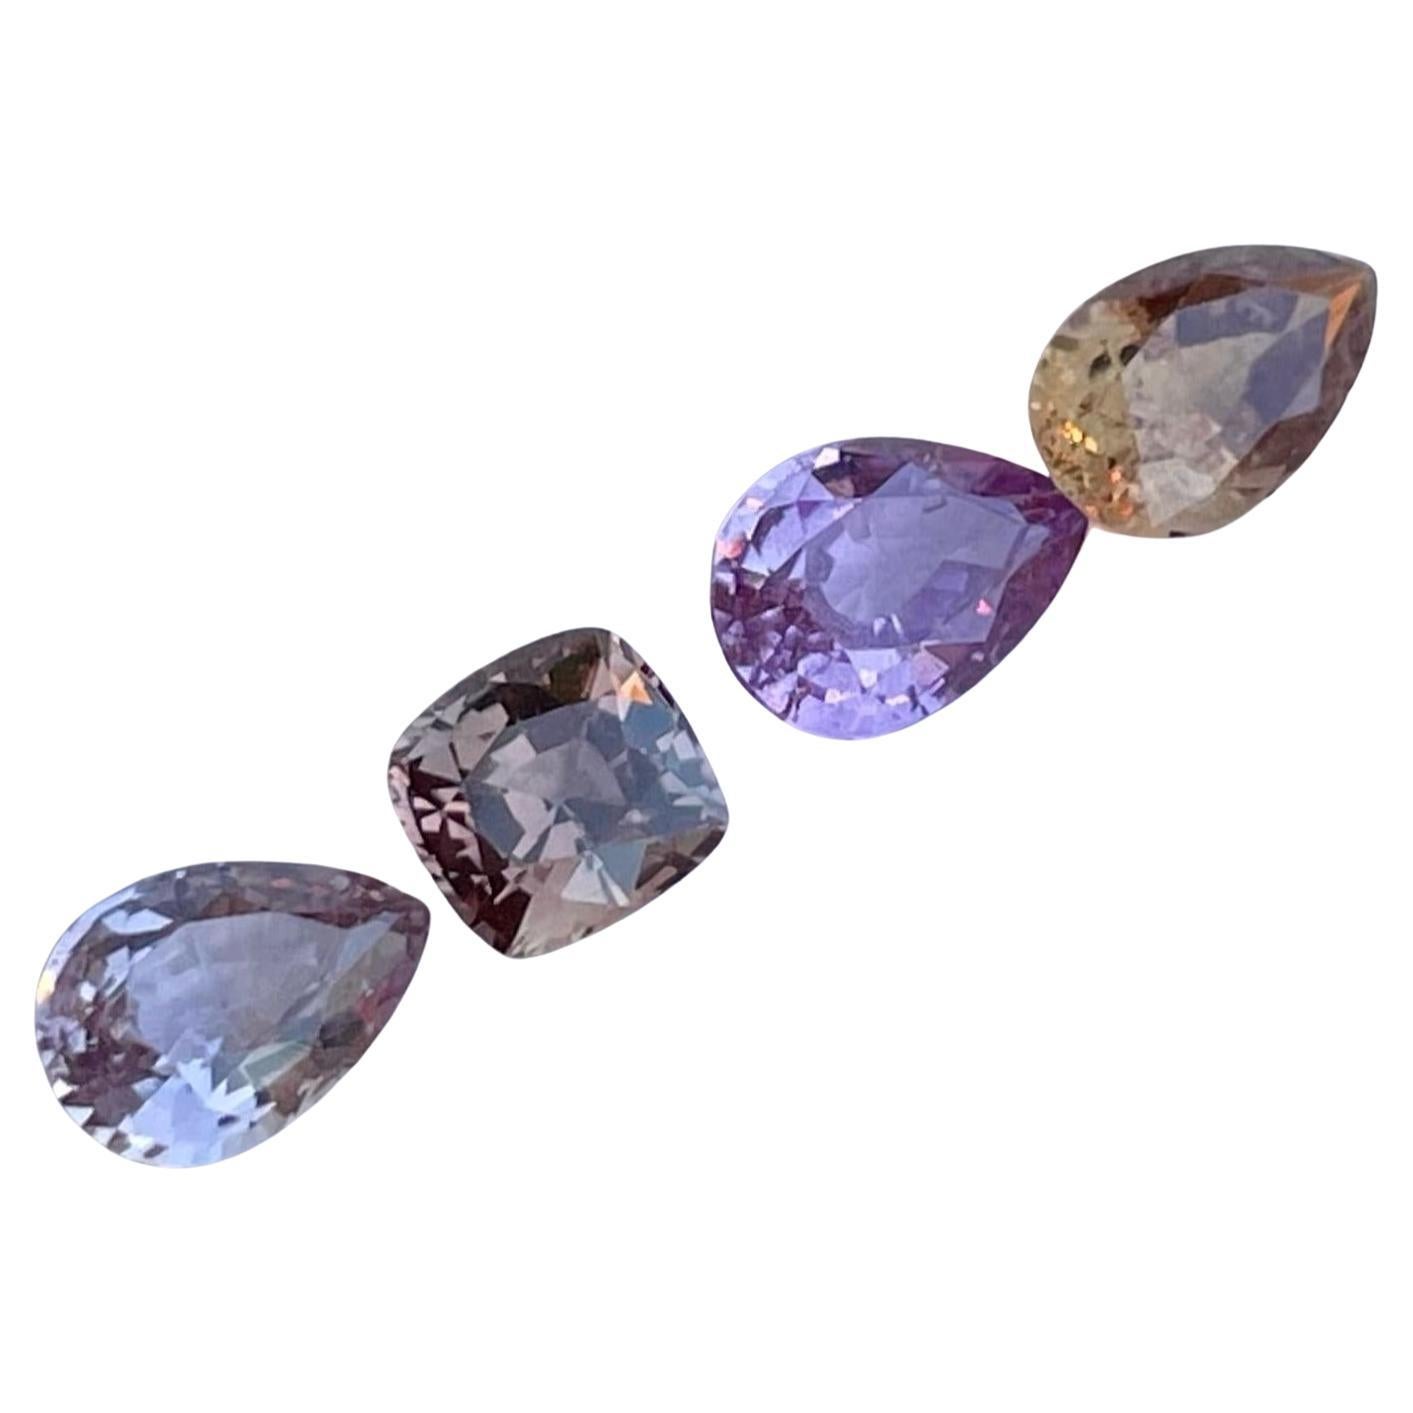 3.48 carats Multi-Color Stones Lot Natural Loose Sapphire Gemstones From Africa